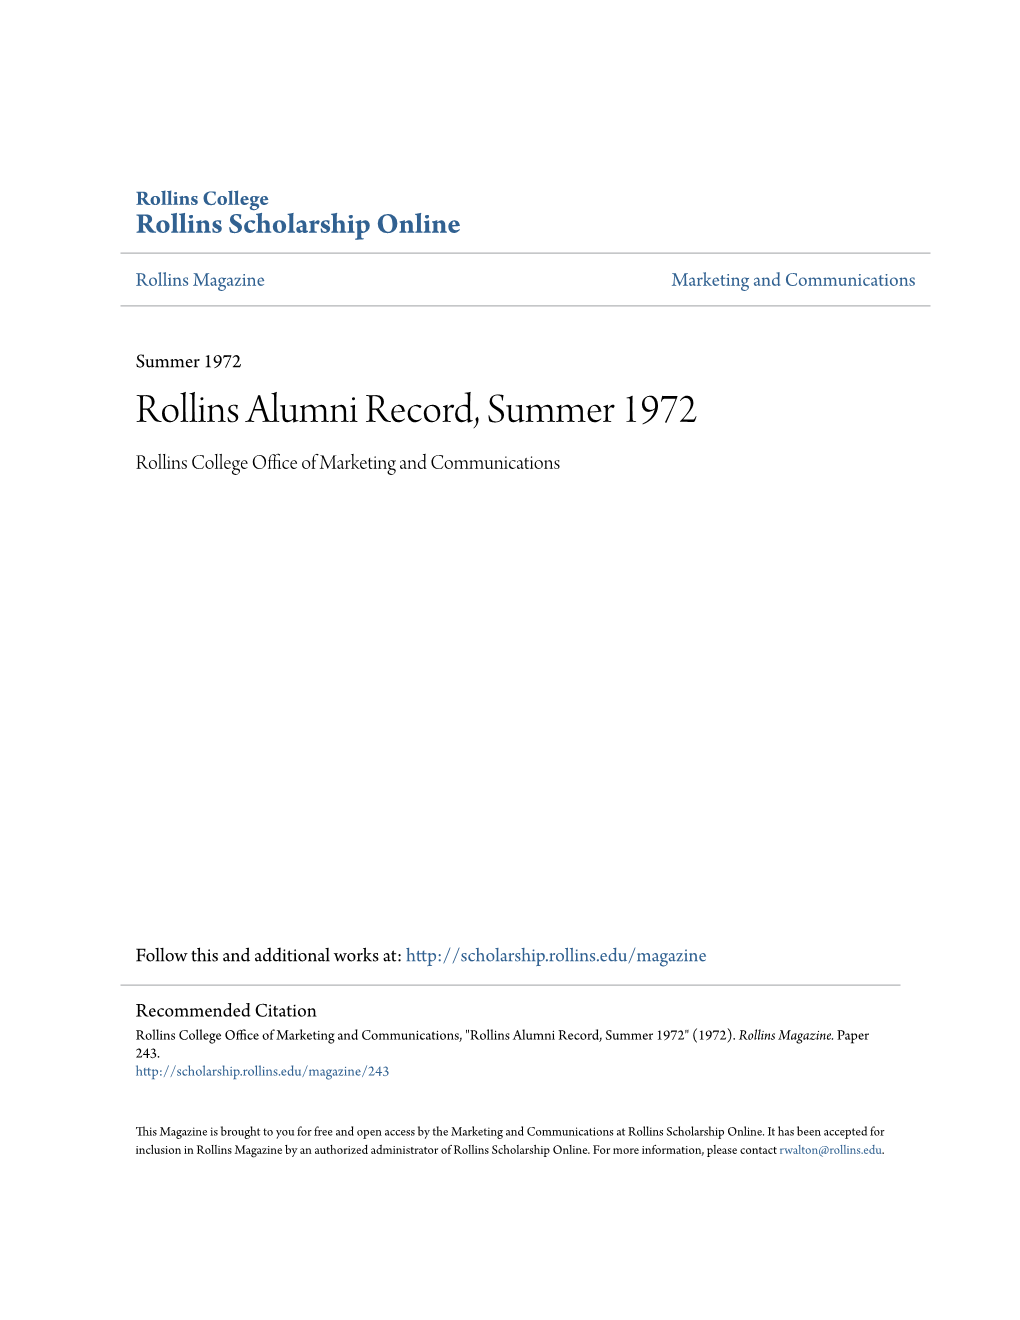 Rollins Alumni Record, Summer 1972 Rollins College Office Ofa M Rketing and Communications